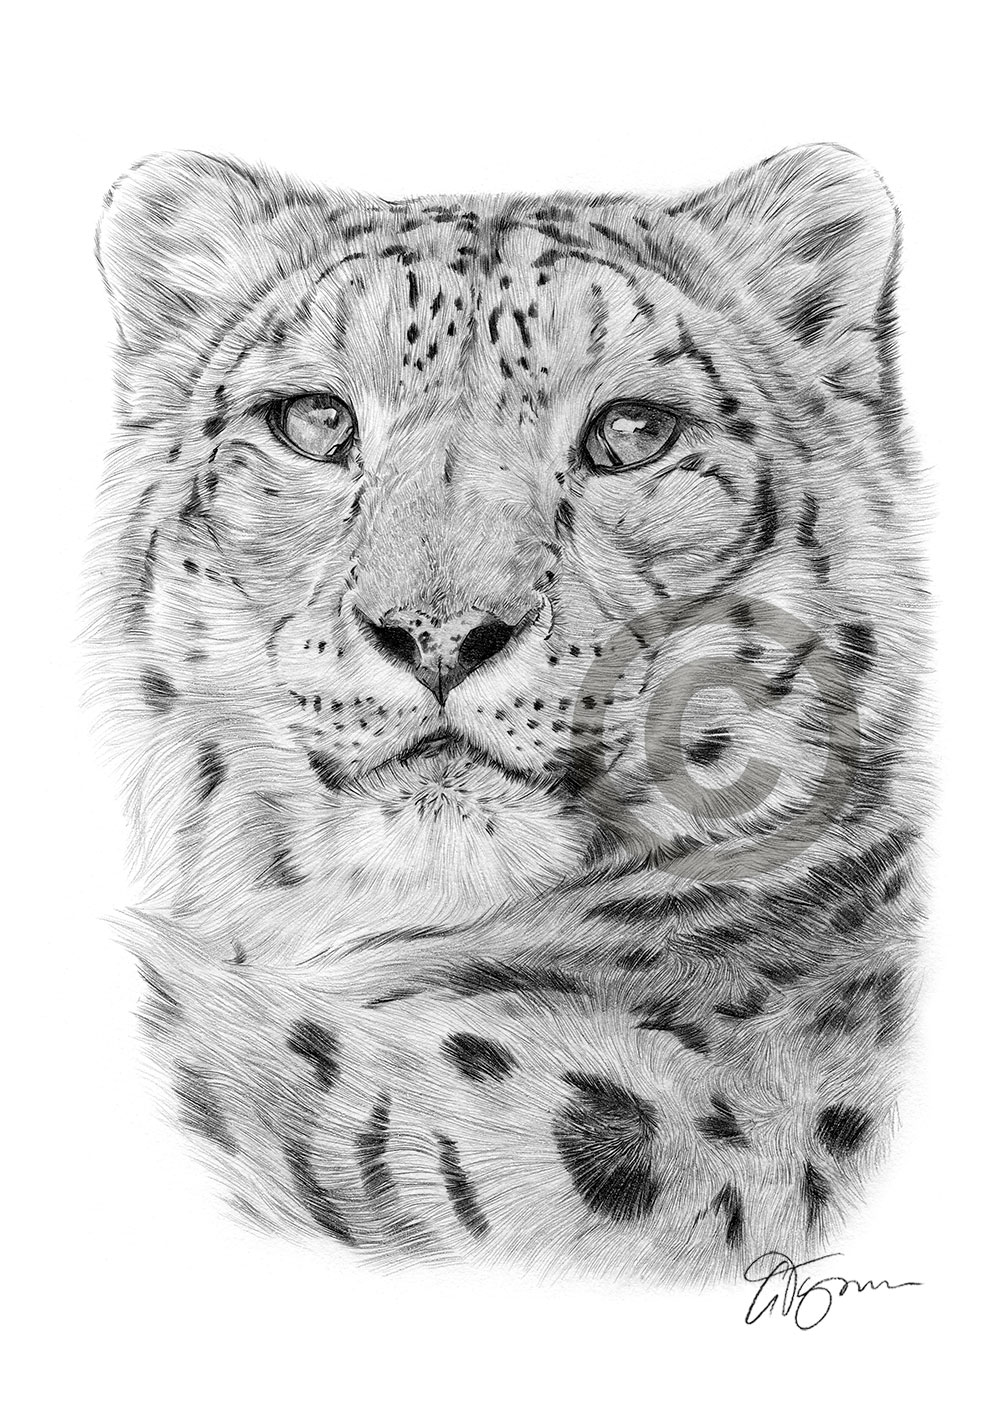 Pencil drawing of an adult snow leopard by artist Gary Tymon